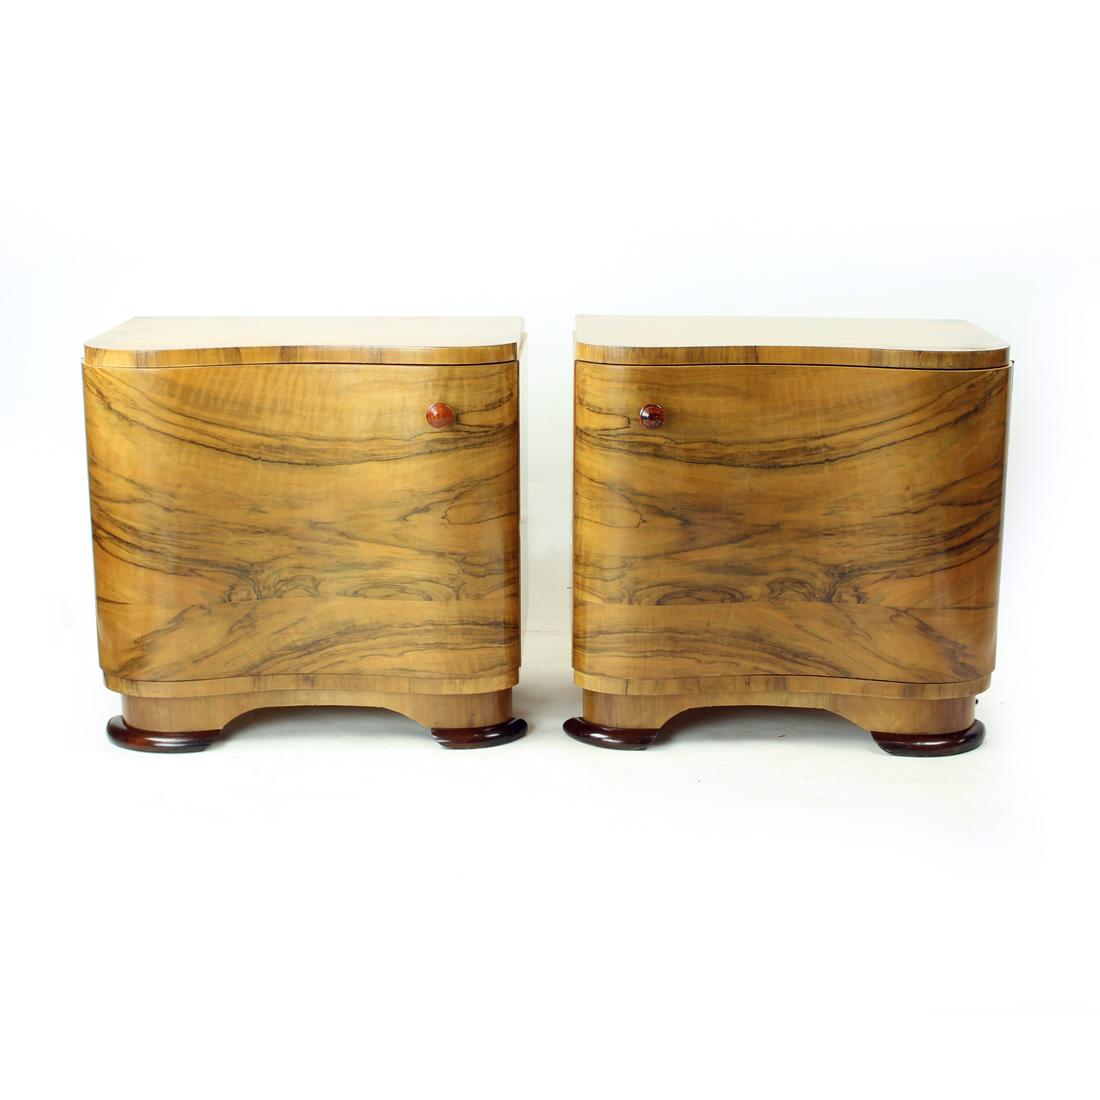 Set of two beautiful bedside tables from art deco era. They are trully unique in their design and use of veneer. The tables are made of oak wood with walnut veneer finish. The beautiful curvy design of the front makes them a stand out pieces. Each